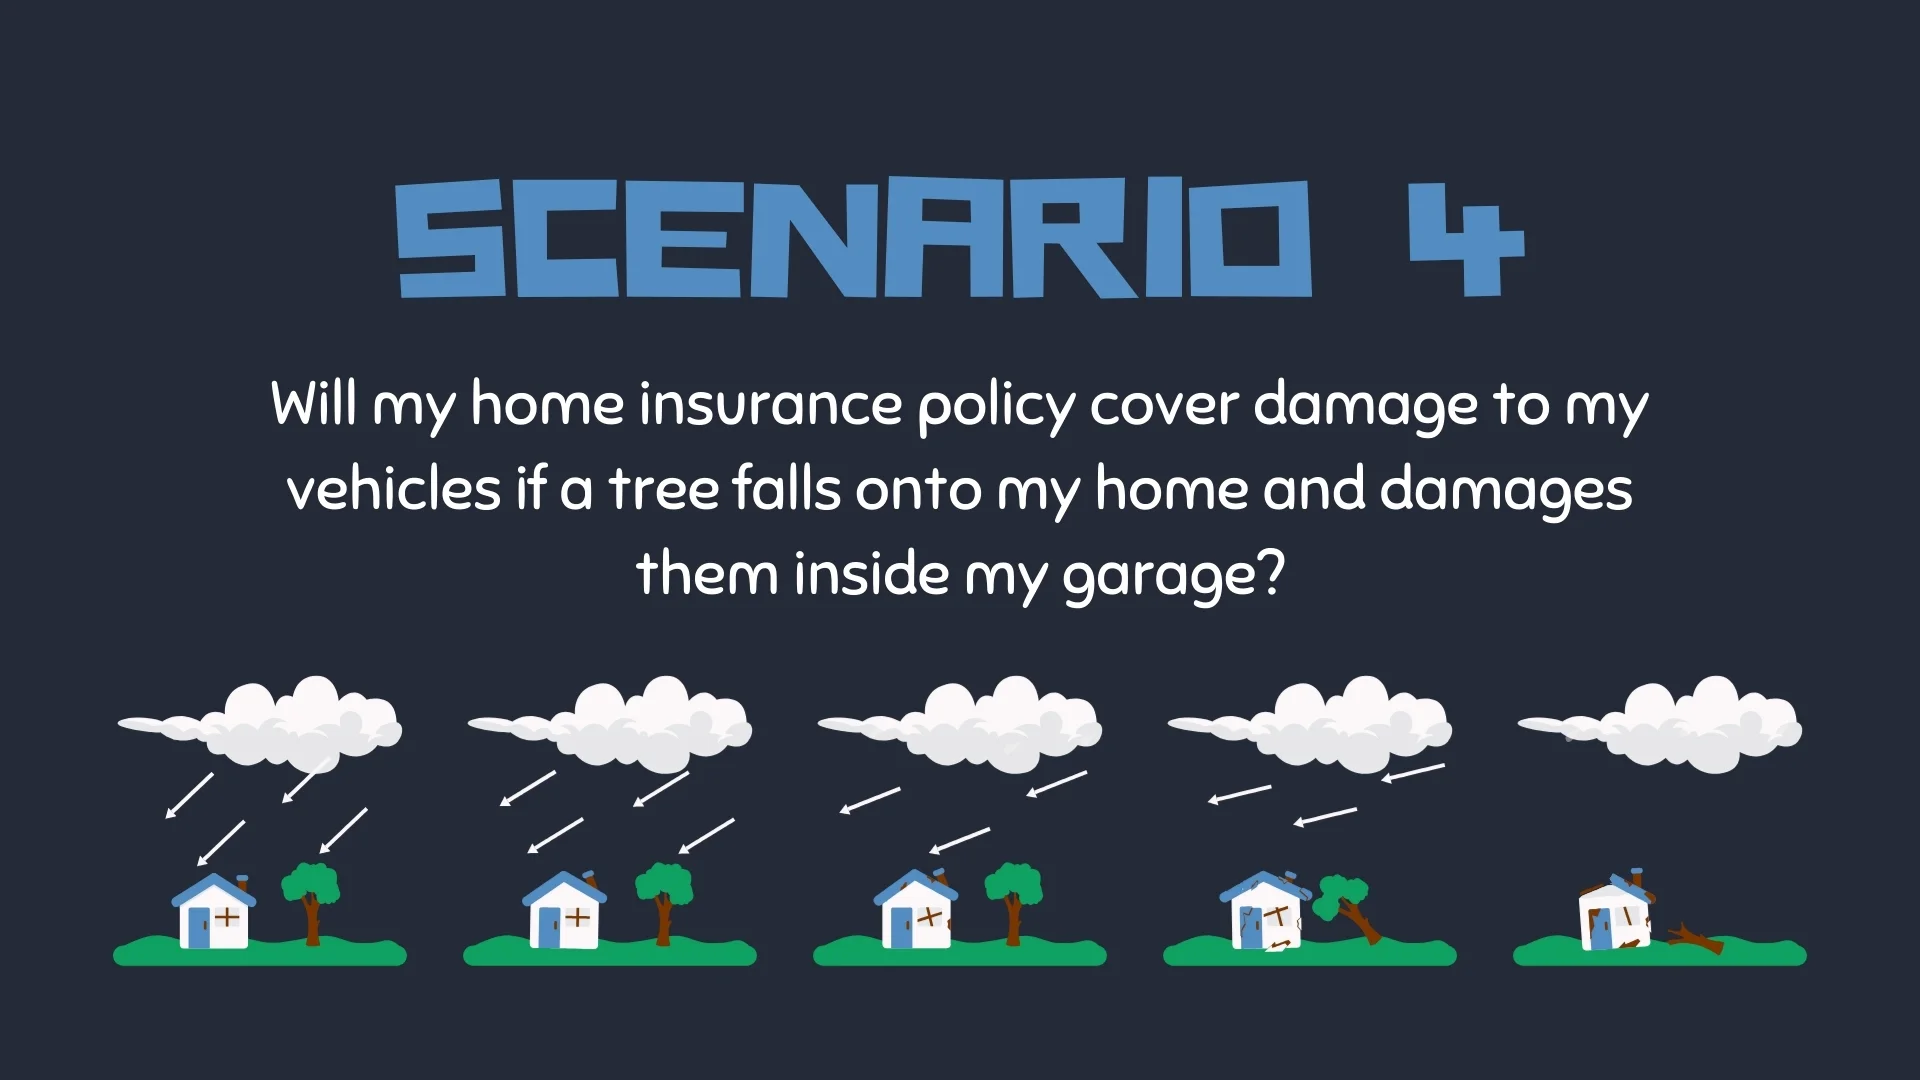 Hurricane Beryl Insurance Claim Scenario 4: Does Home Insurance Cover Vehicle Damage from Fallen Trees in Your Garage? (The Woodlands, TX)